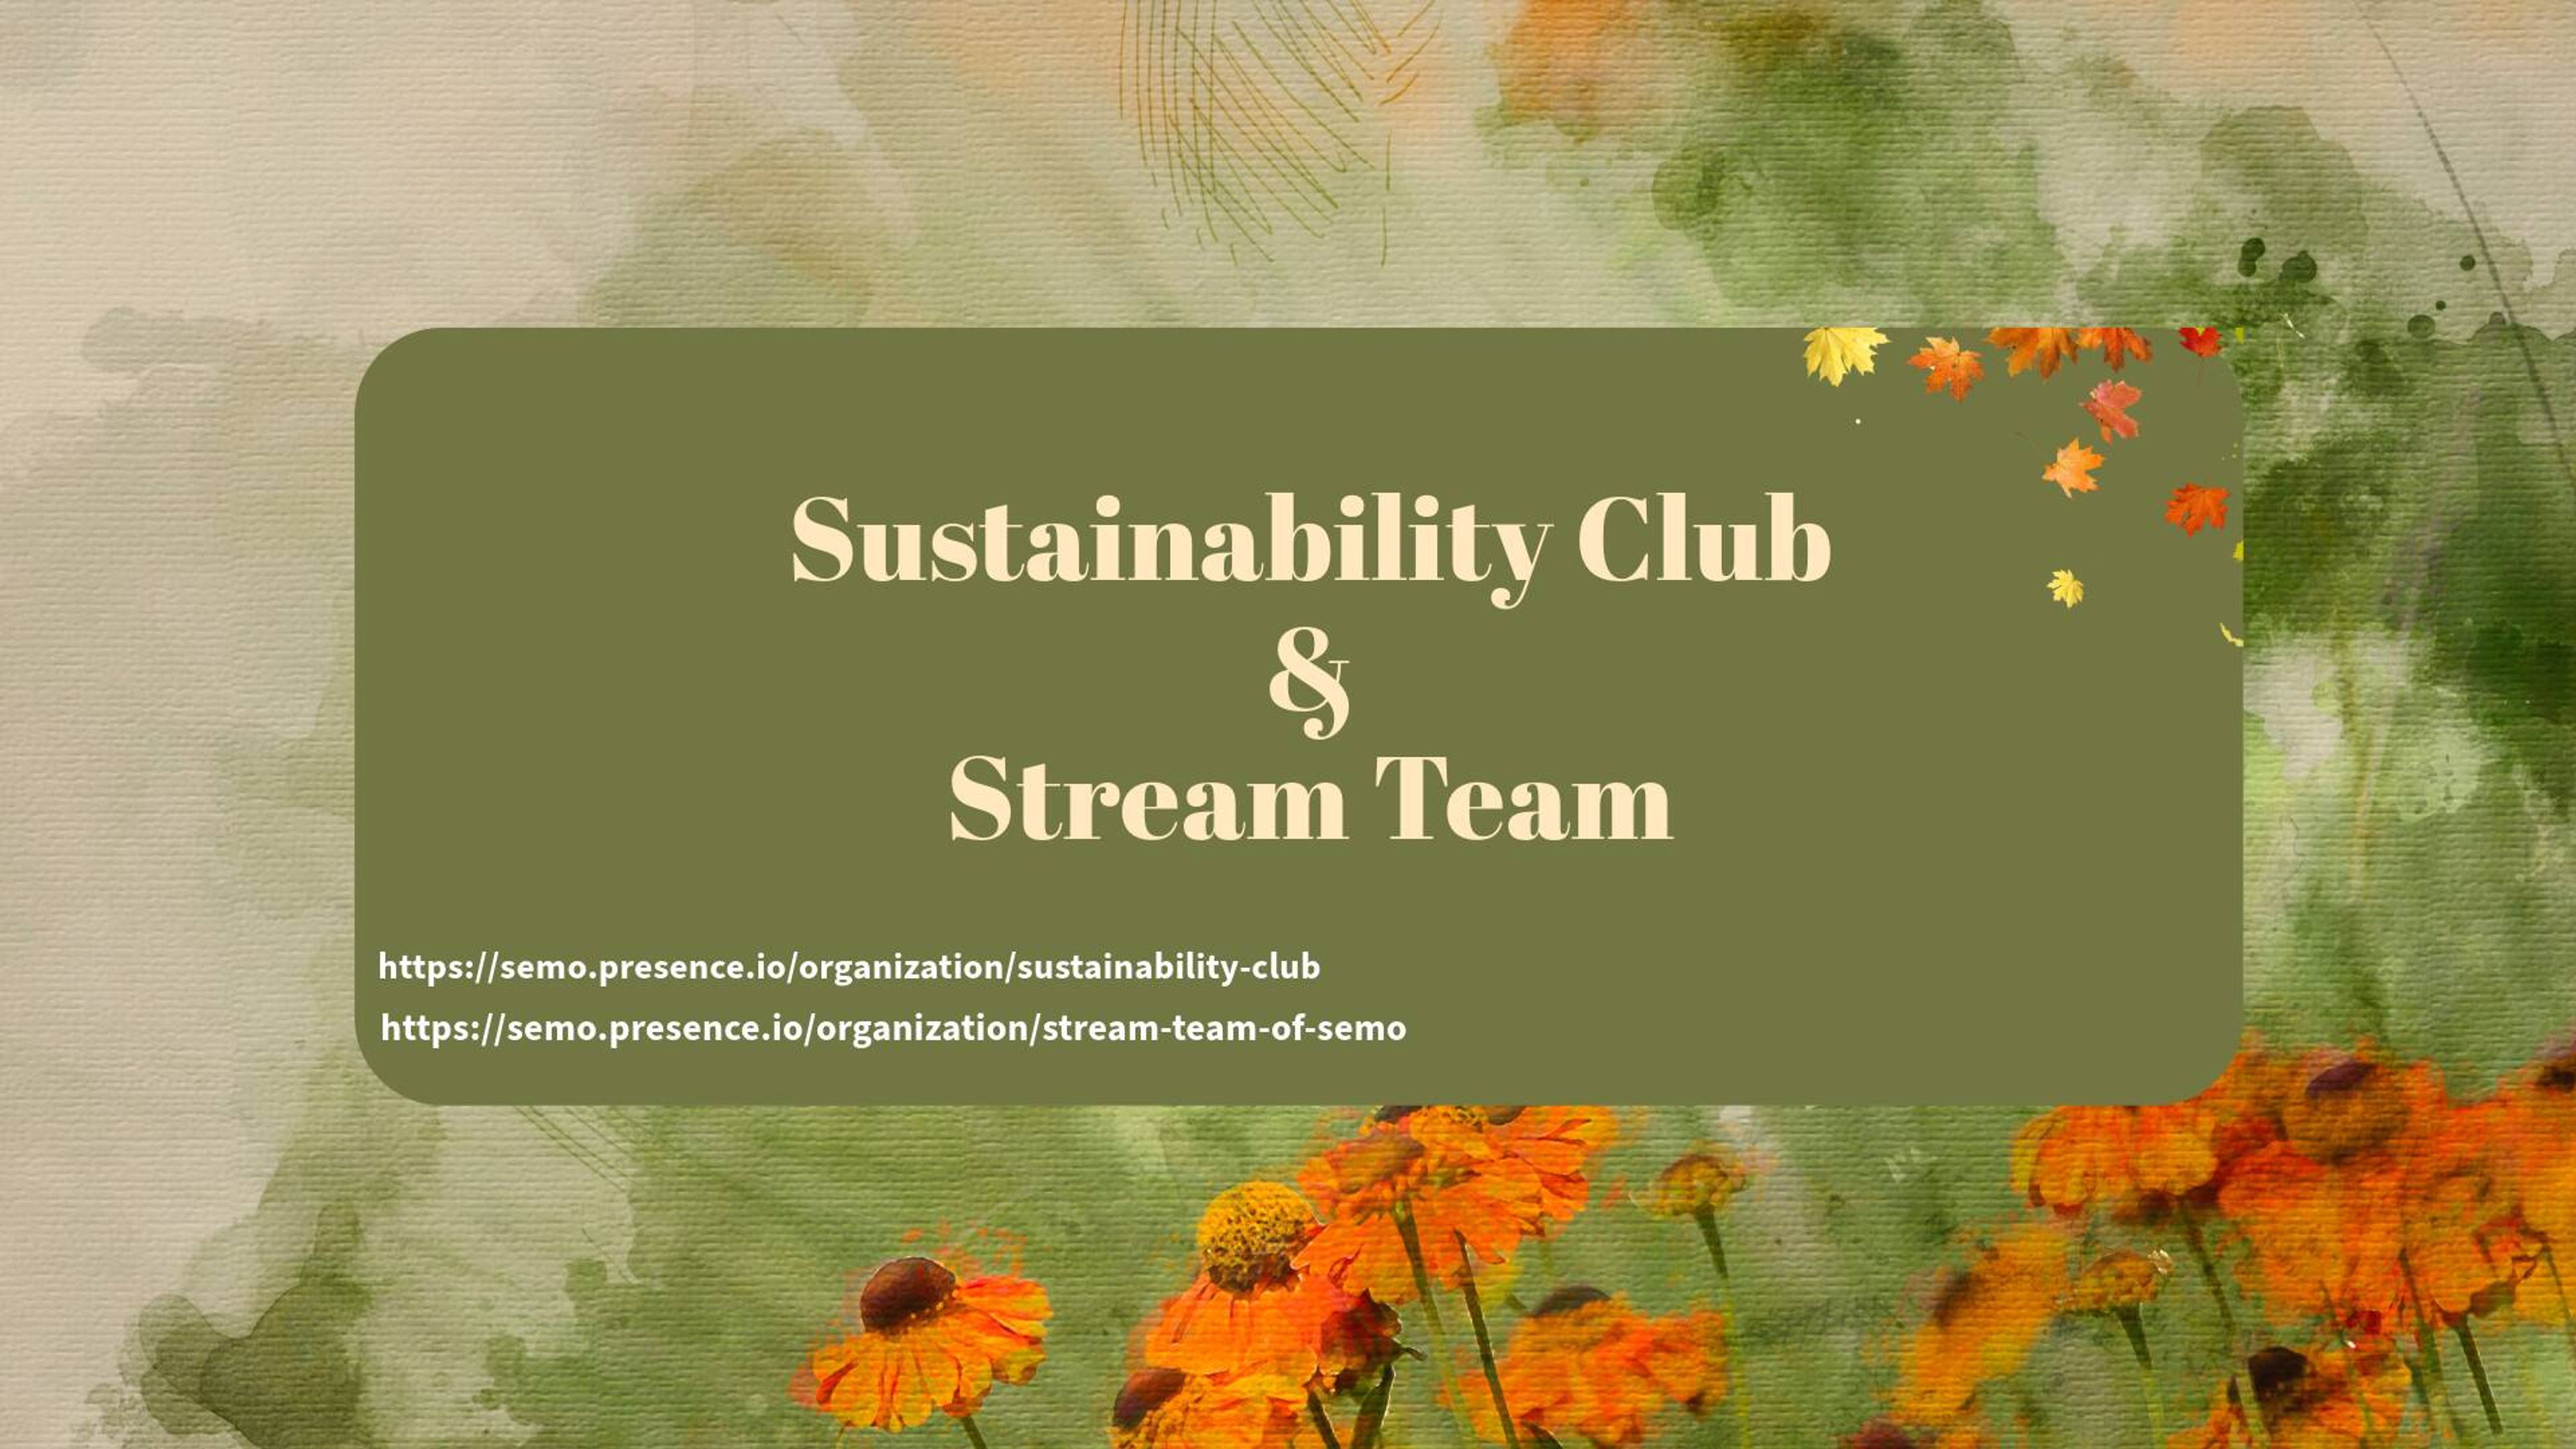 Sustainability Club & Stream Team promotes conservationism at SEMO
